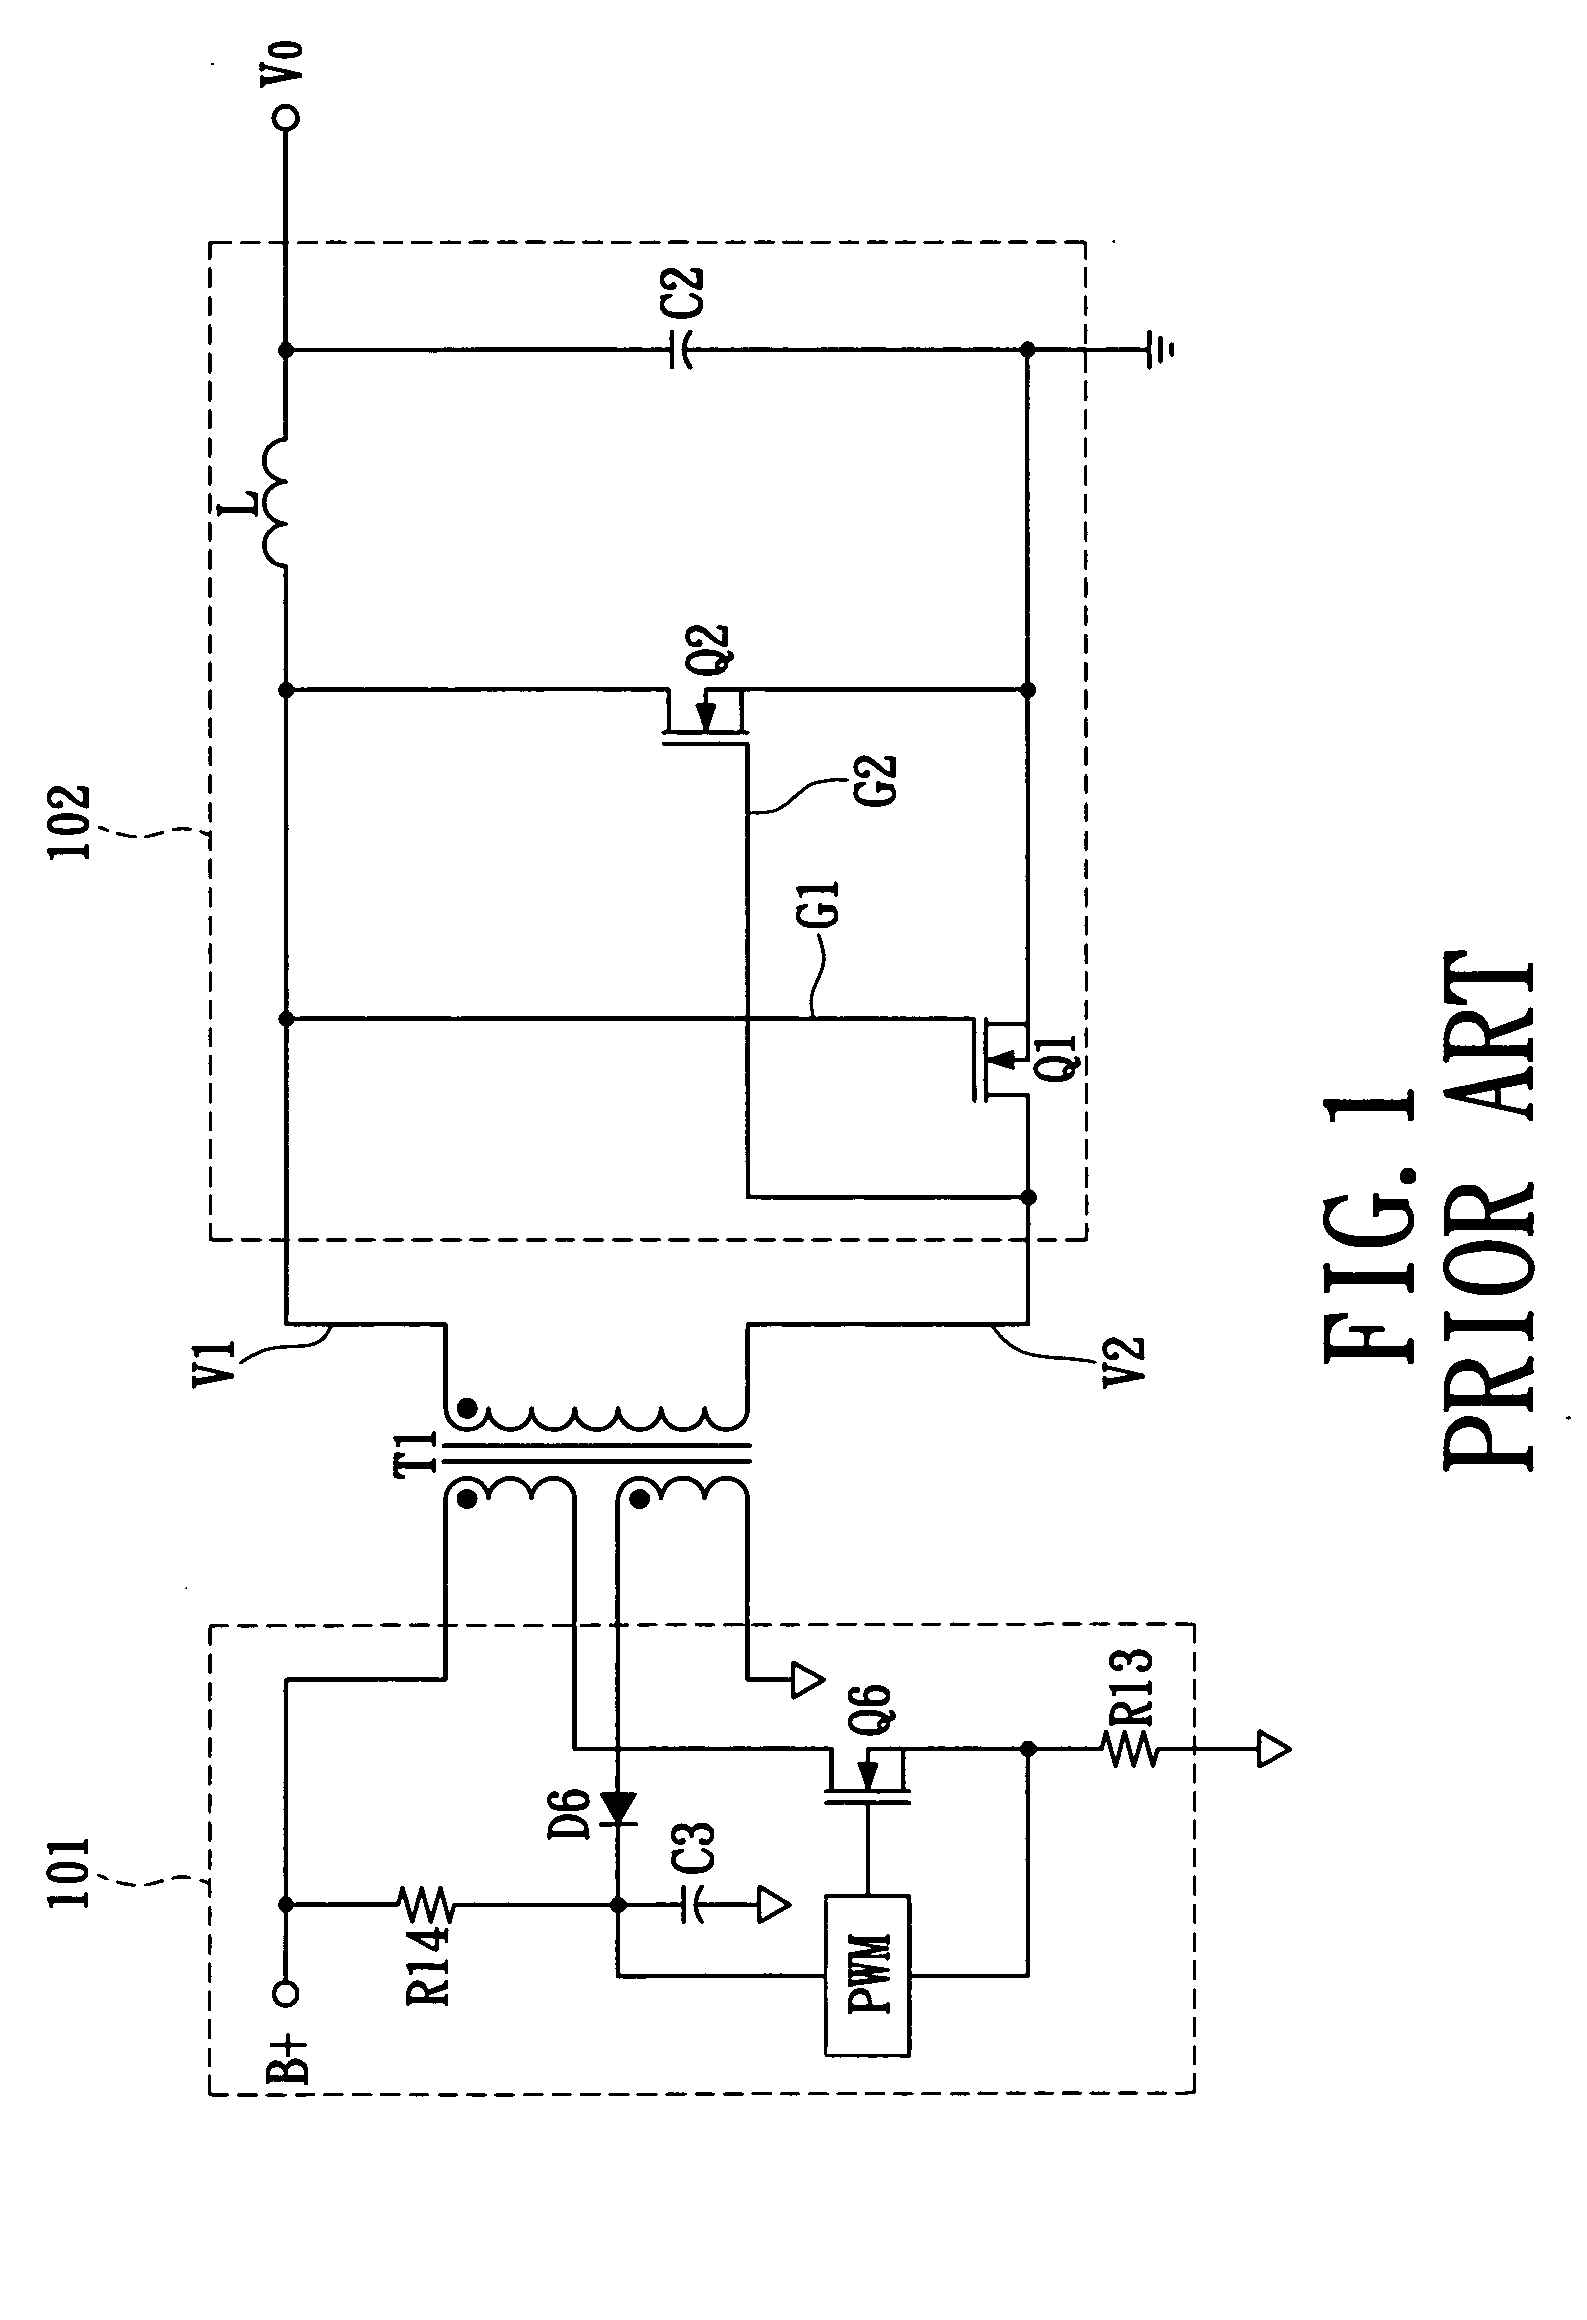 Synchronous rectification circuit with dead time regulation